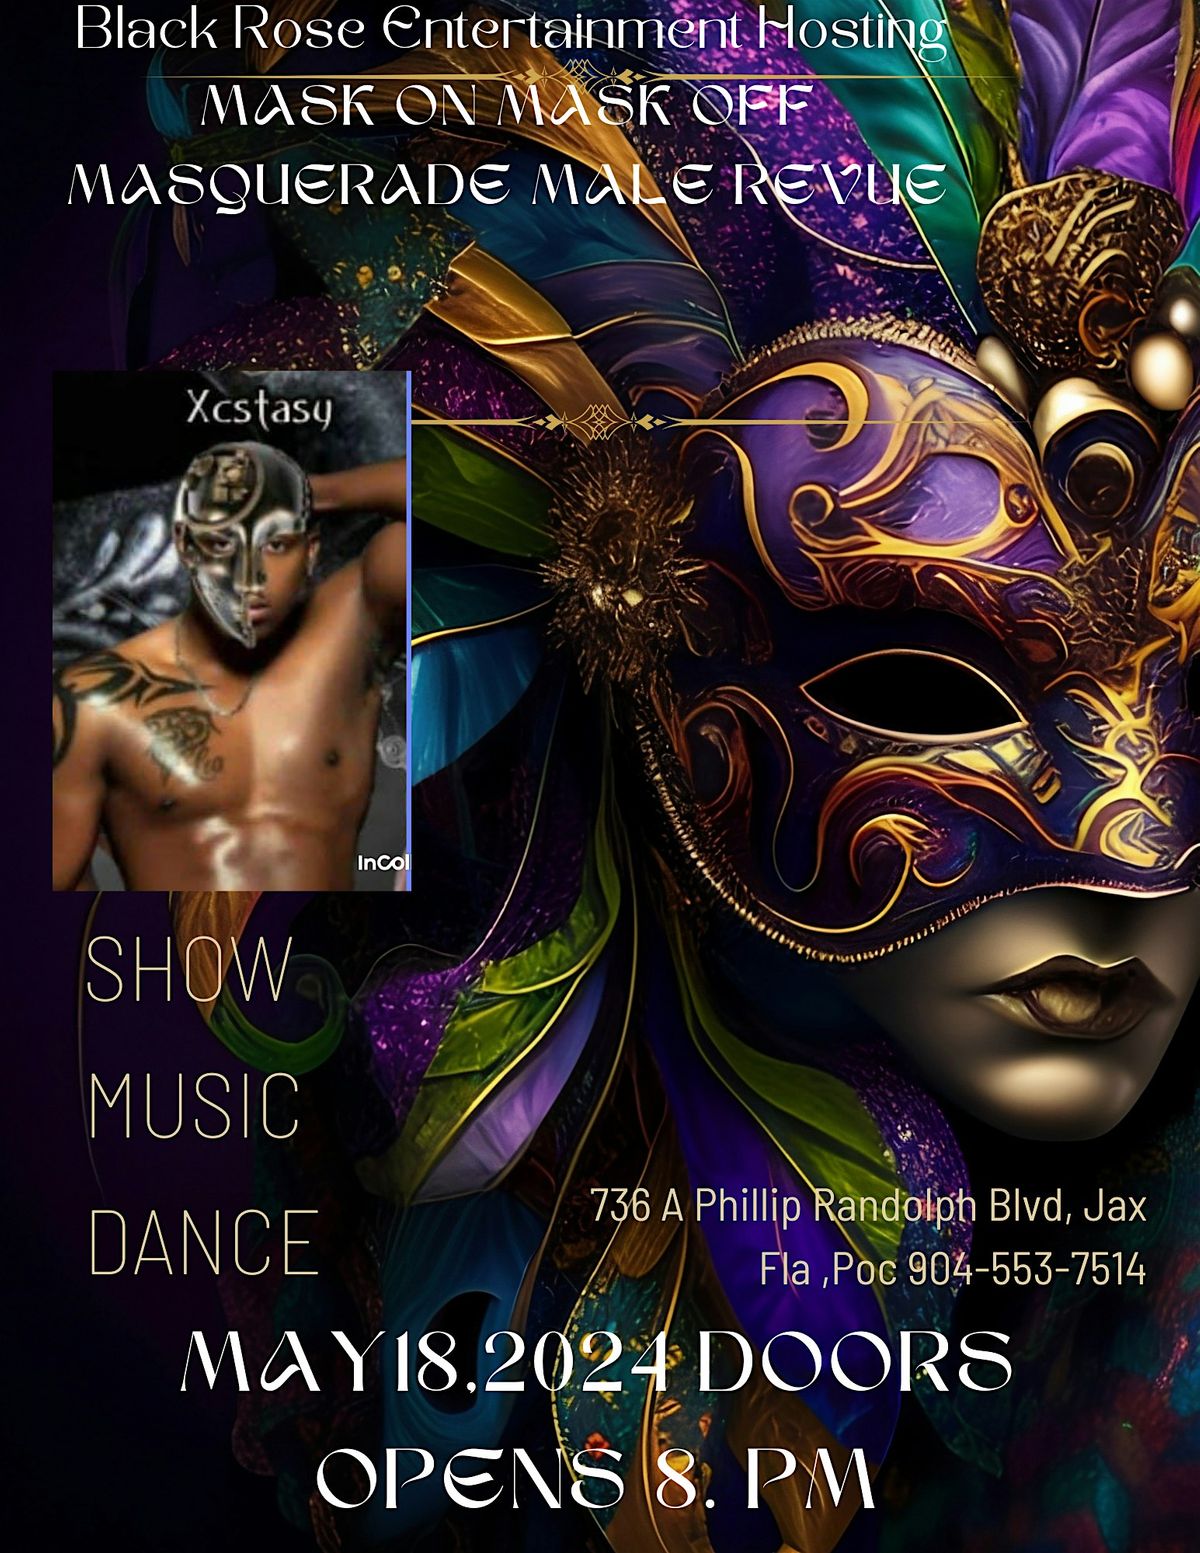 MASK ON MASK OFF MALE REVUE MASQUERDE